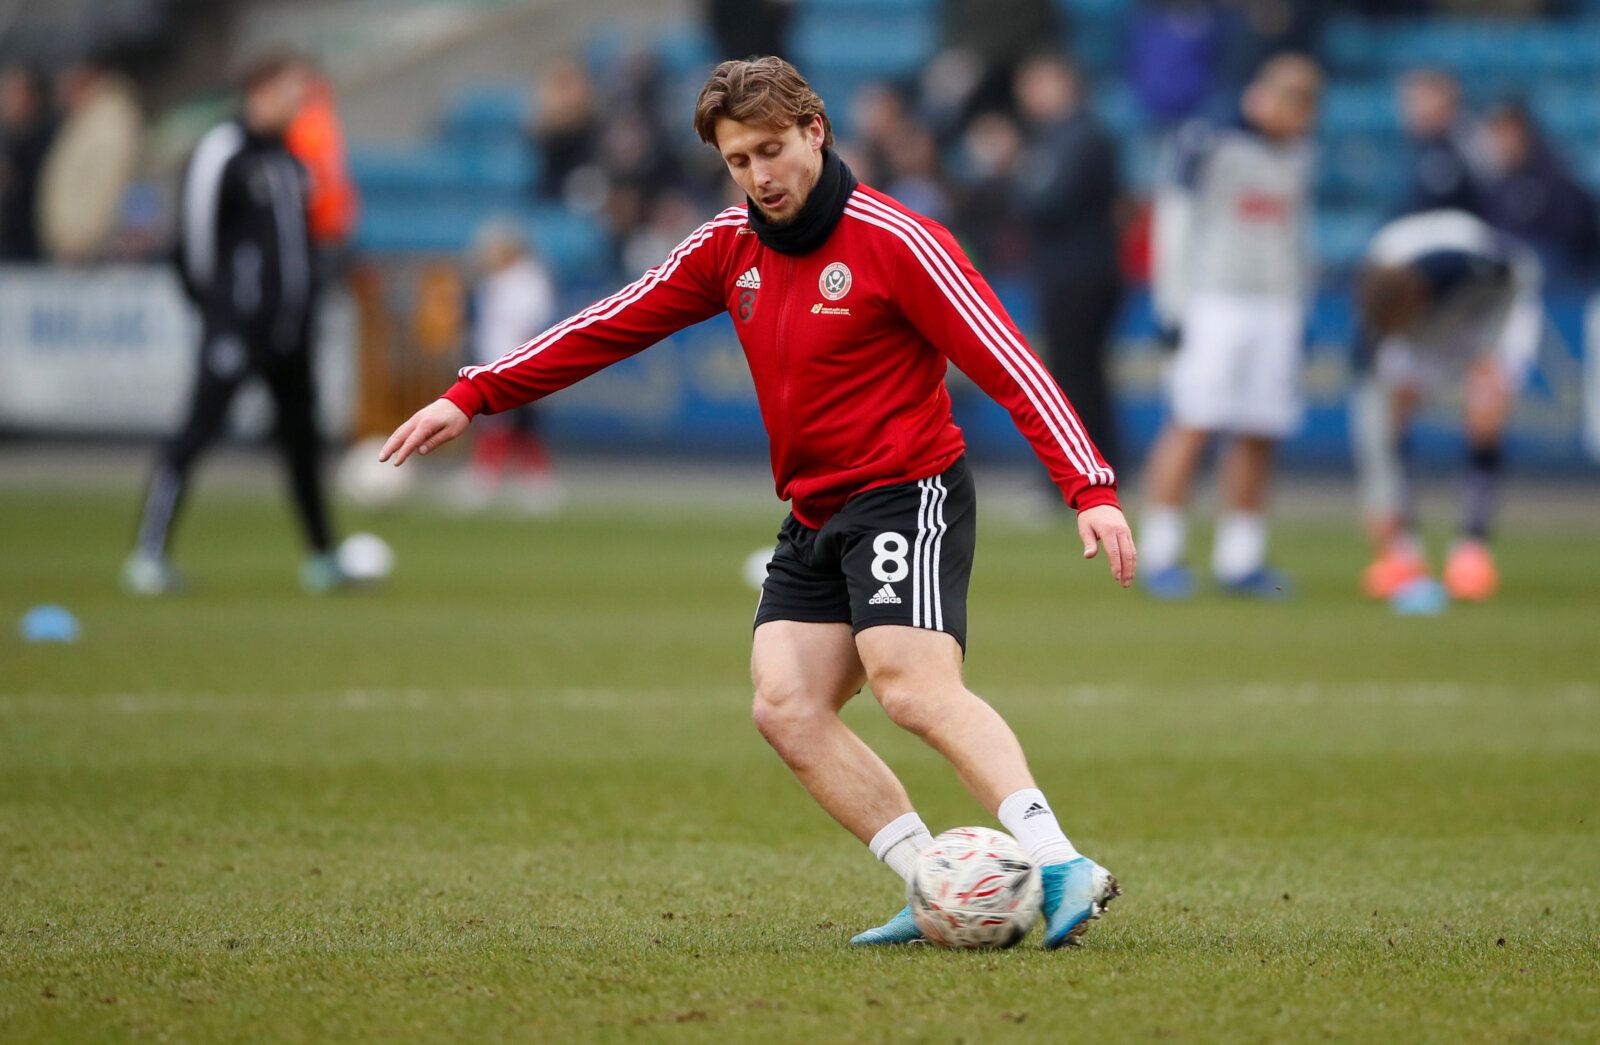 Soccer Football - FA Cup Fourth Round - Millwall v Sheffield United - The Den, London, Britain - January 25, 2020  Sheffield United's Luke Freeman during the warm up before the match  REUTERS/David Klein